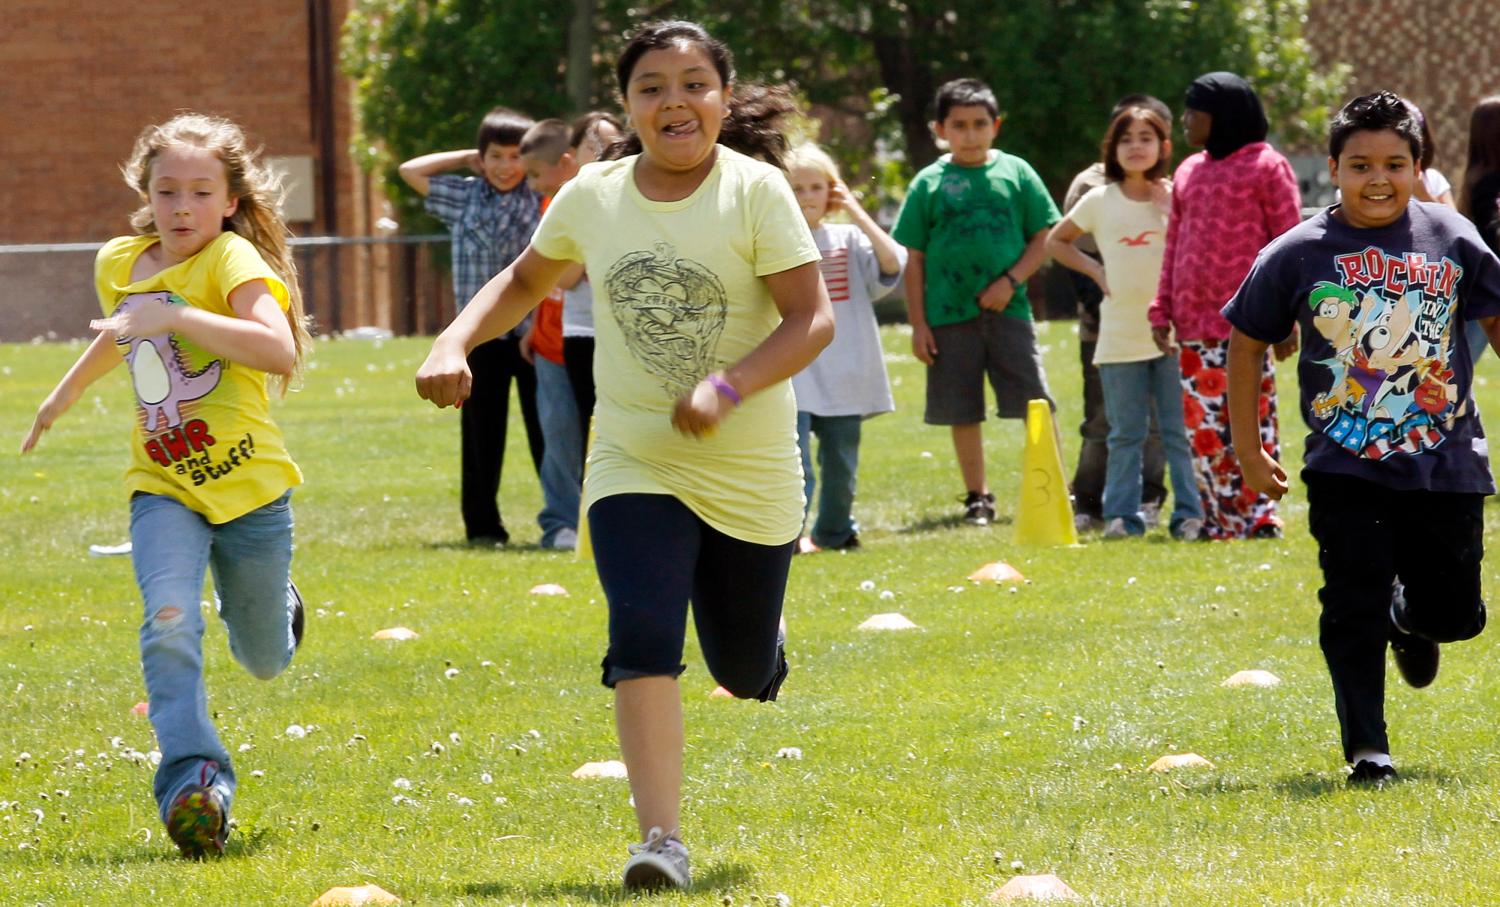 Students at Rose Hill Elementary School (L-R) Alexis Reubenstein, Delmy Roman-Sanchez and Jesus Anguiano participate in a running race during physical education class in Commerce City, Colorado May 1, 2012.